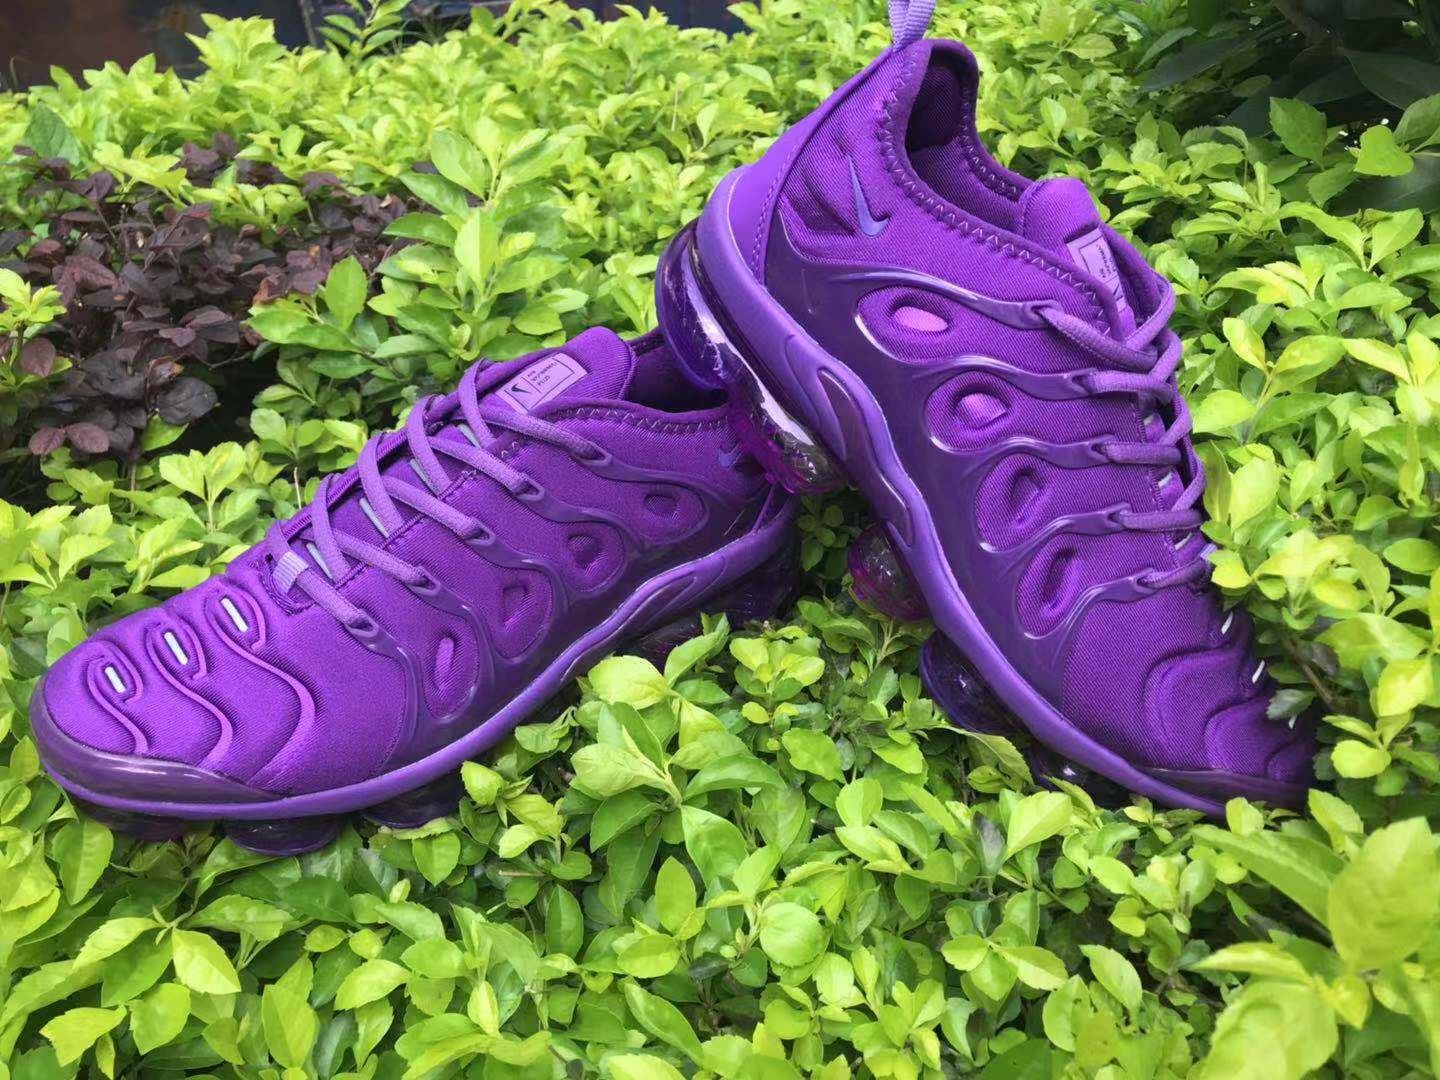 Women's Hot sale Running weapon Nike Air Max TN 2019 Shoes 012